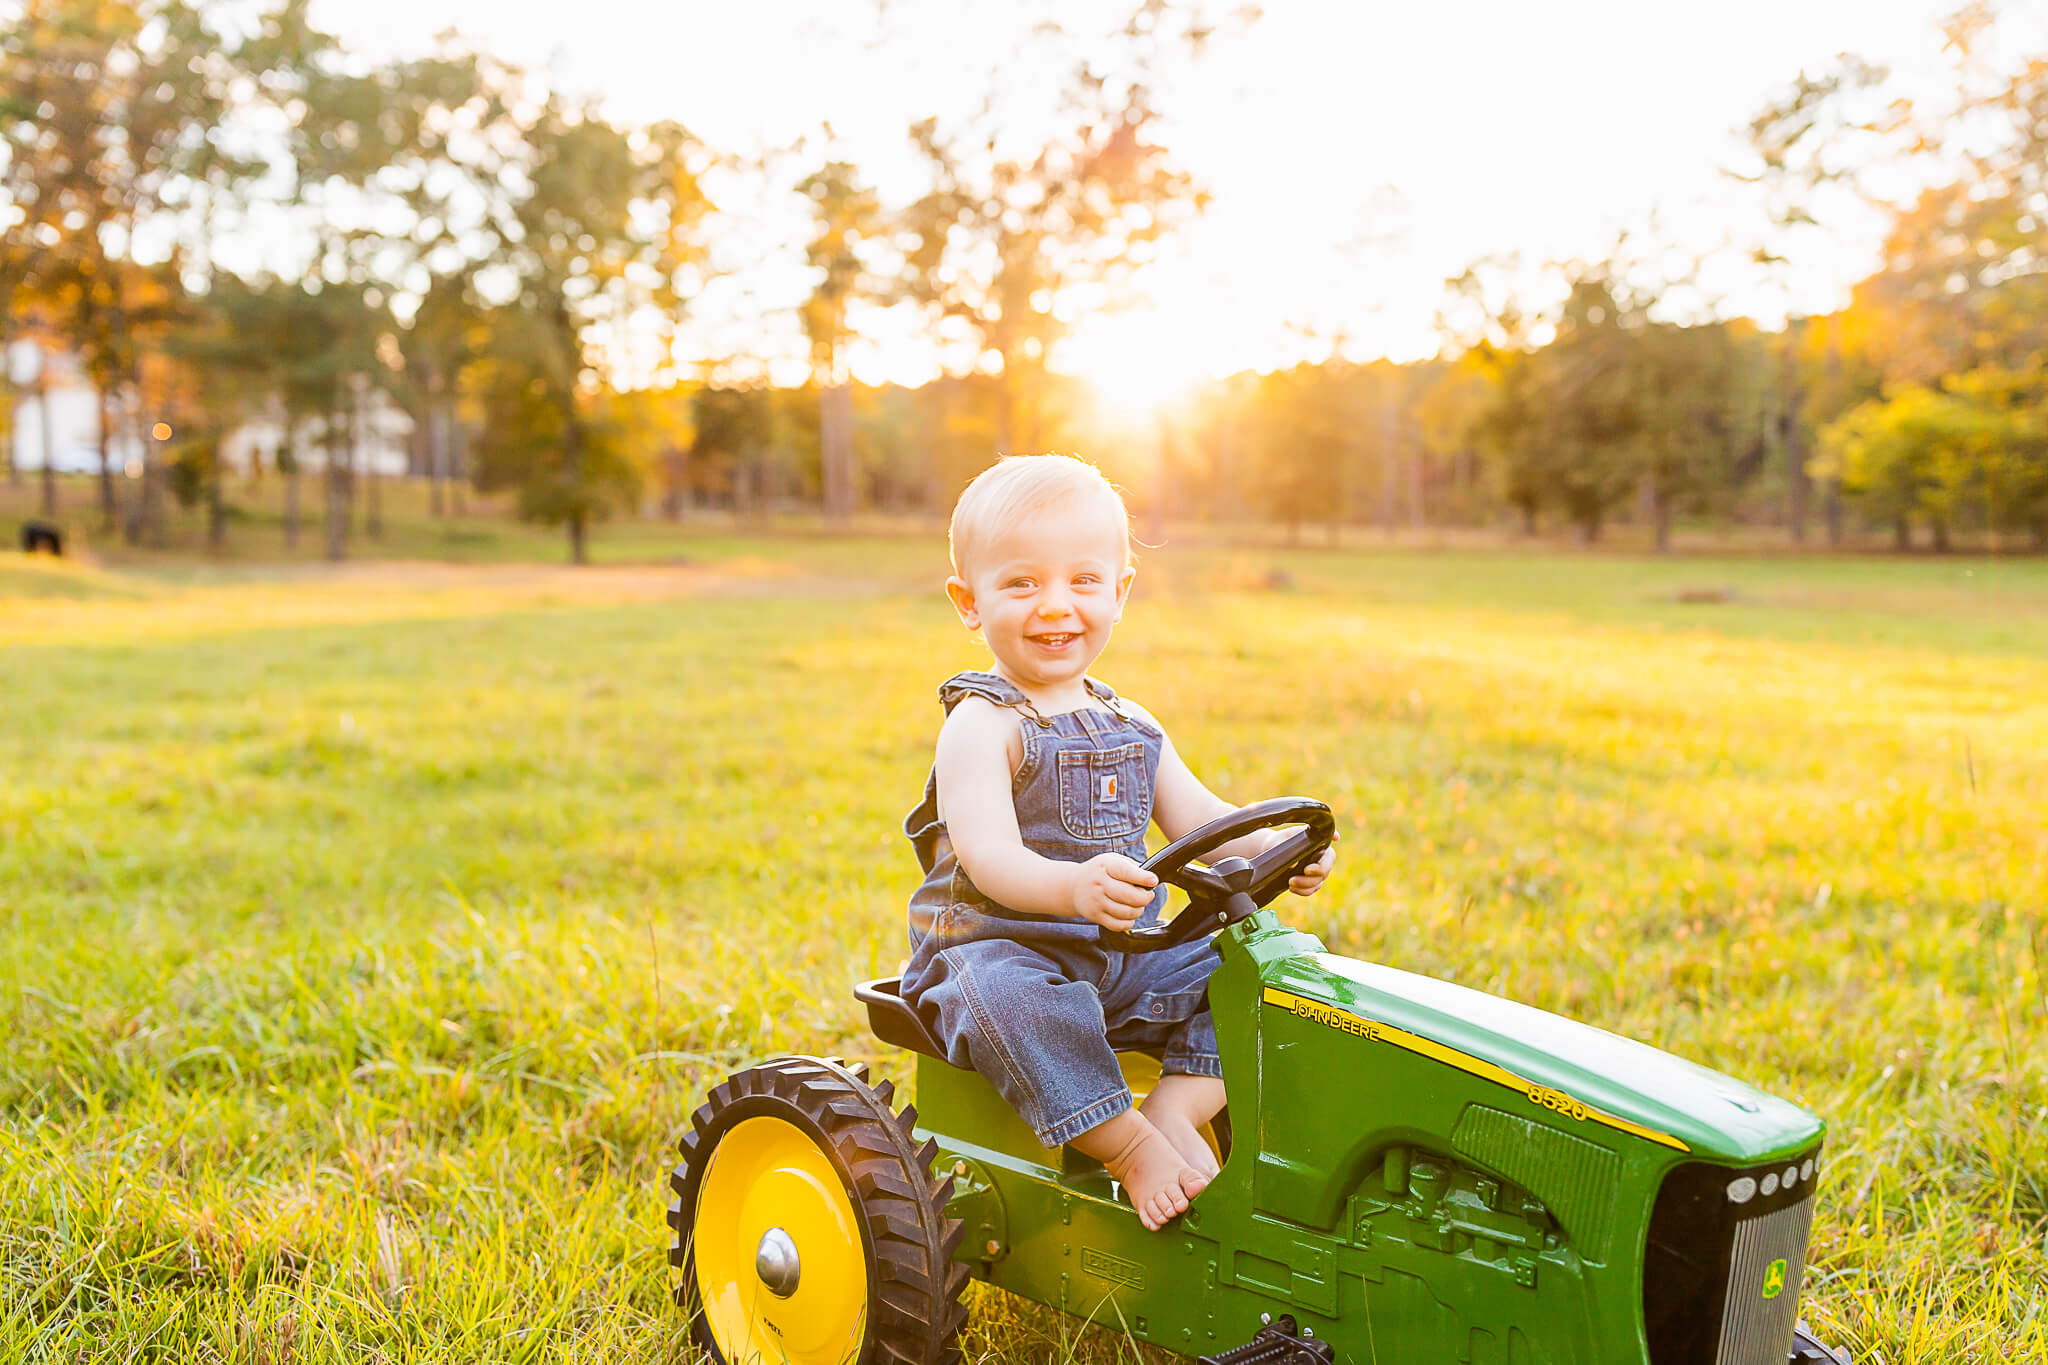 little boy in blue overalls riding on a green john deere tractor at sunset Lawn care birmingham al